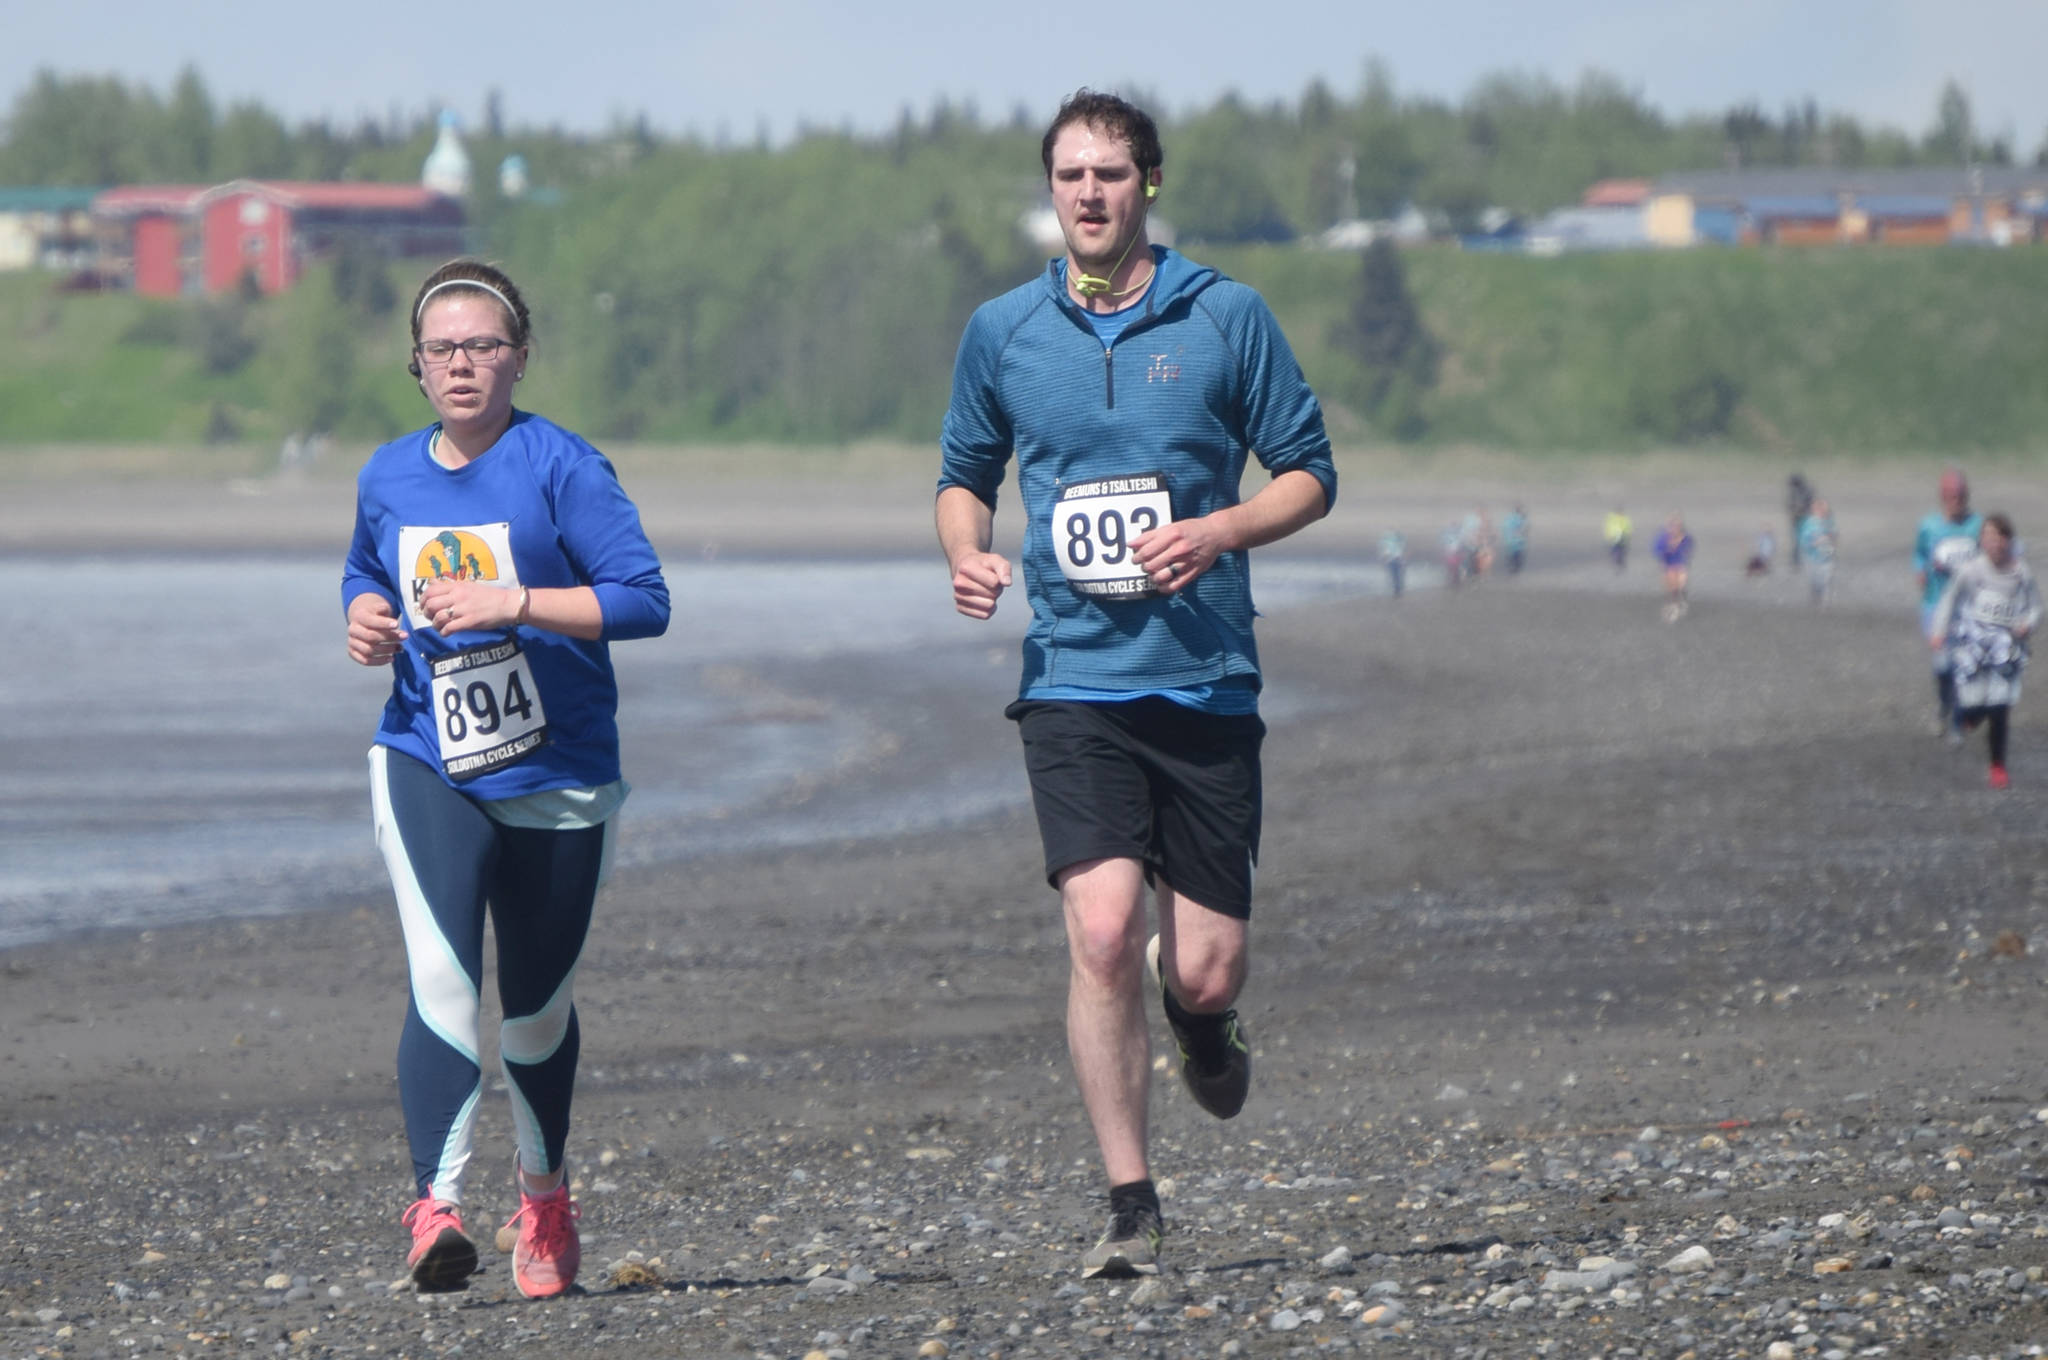 Chloe and Elijah Deatherage of Kenai, Alaska, race in the three-mile run of the Mouth to Mouth Wild Run and Ride on Monday, May 27, 2019, at the Kenai beach. Chloe was using the event to get back into running. She said she’d never run on the beach before, but would definitely do it again. Elijah would later win the drawing for the fat bike. (Photo by Jeff Helminiak/Peninsula Clarion)                                Chloe and Elijah Deatherage of Kenai, Alaska, race in the three-mile run of the Mouth to Mouth Wild Run and Ride on Monday, May 27, 2019, at the Kenai beach. Chloe was using the event to get back into running. She said she’d never run on the beach before, but would definitely do it again. Elijah would later win the drawing for the fat bike. (Photo by Jeff Helminiak/Peninsula Clarion)